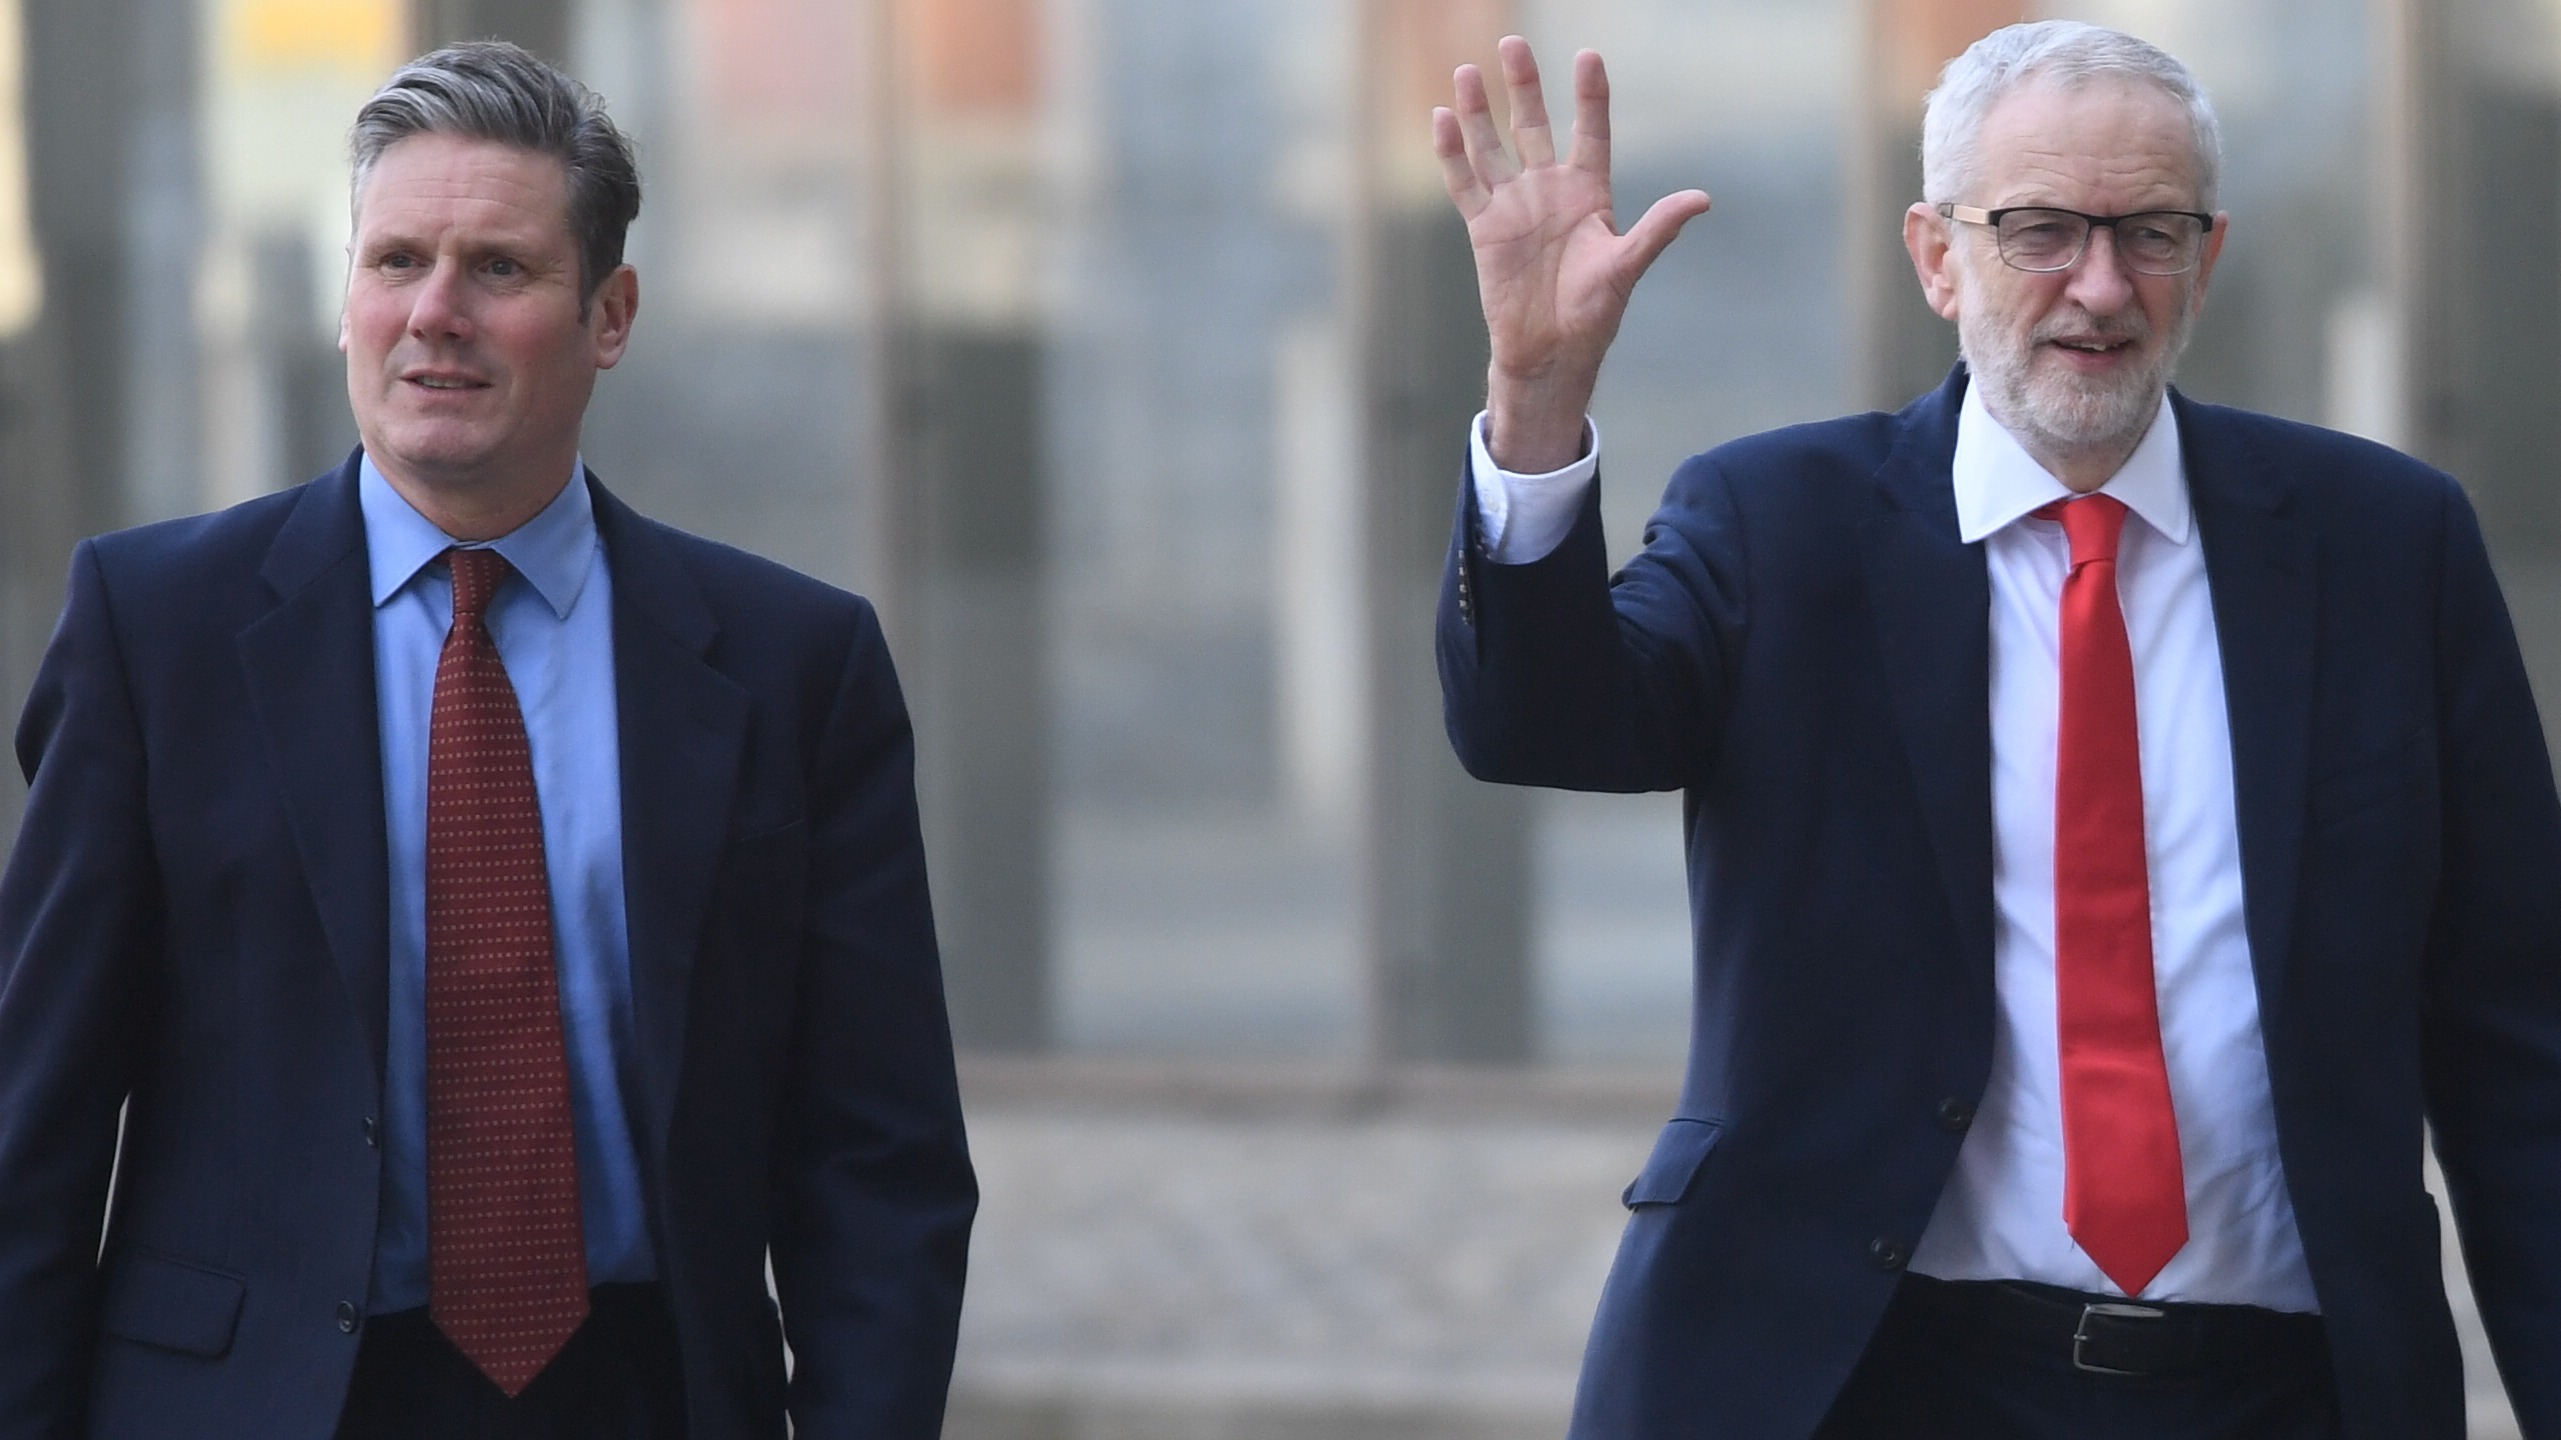 Exclusive Jeremy Corbyn Calls Sir Keir Starmer Weak For Blaming Labours Problems On Him 